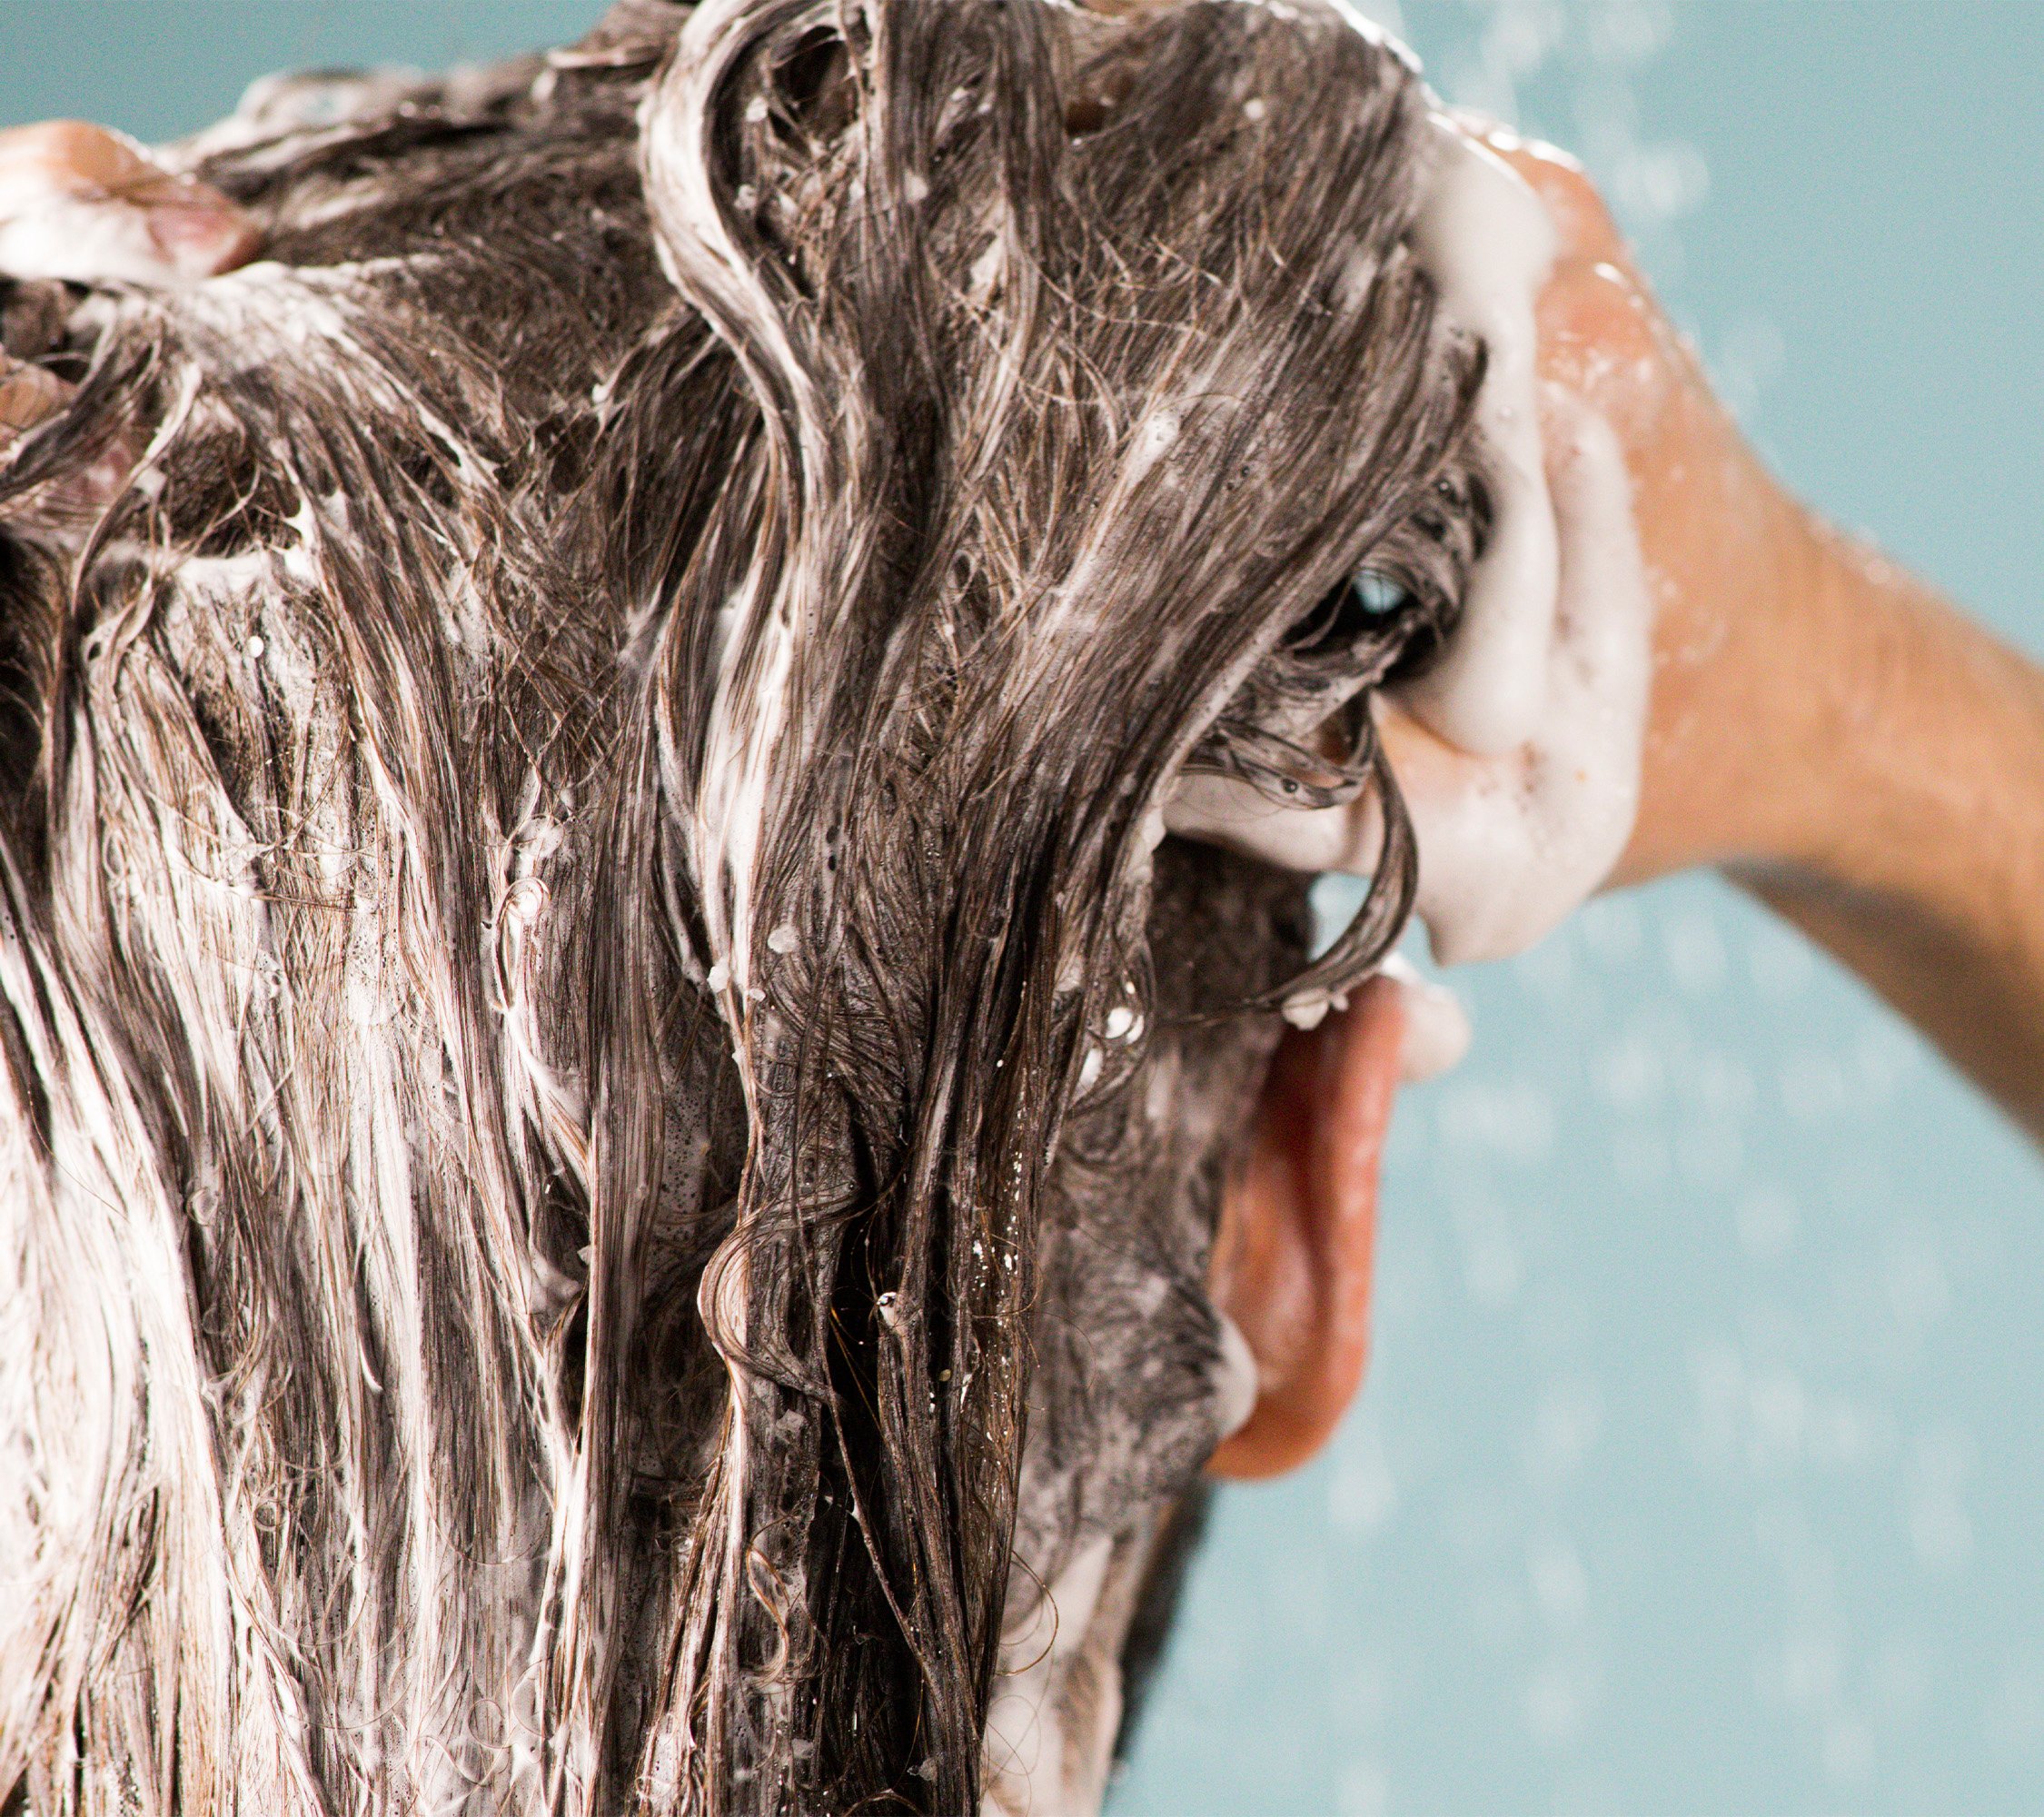 A close-up of the model's hair, as they lather up with luscious, Big shampoo suds working it in with their fingers.